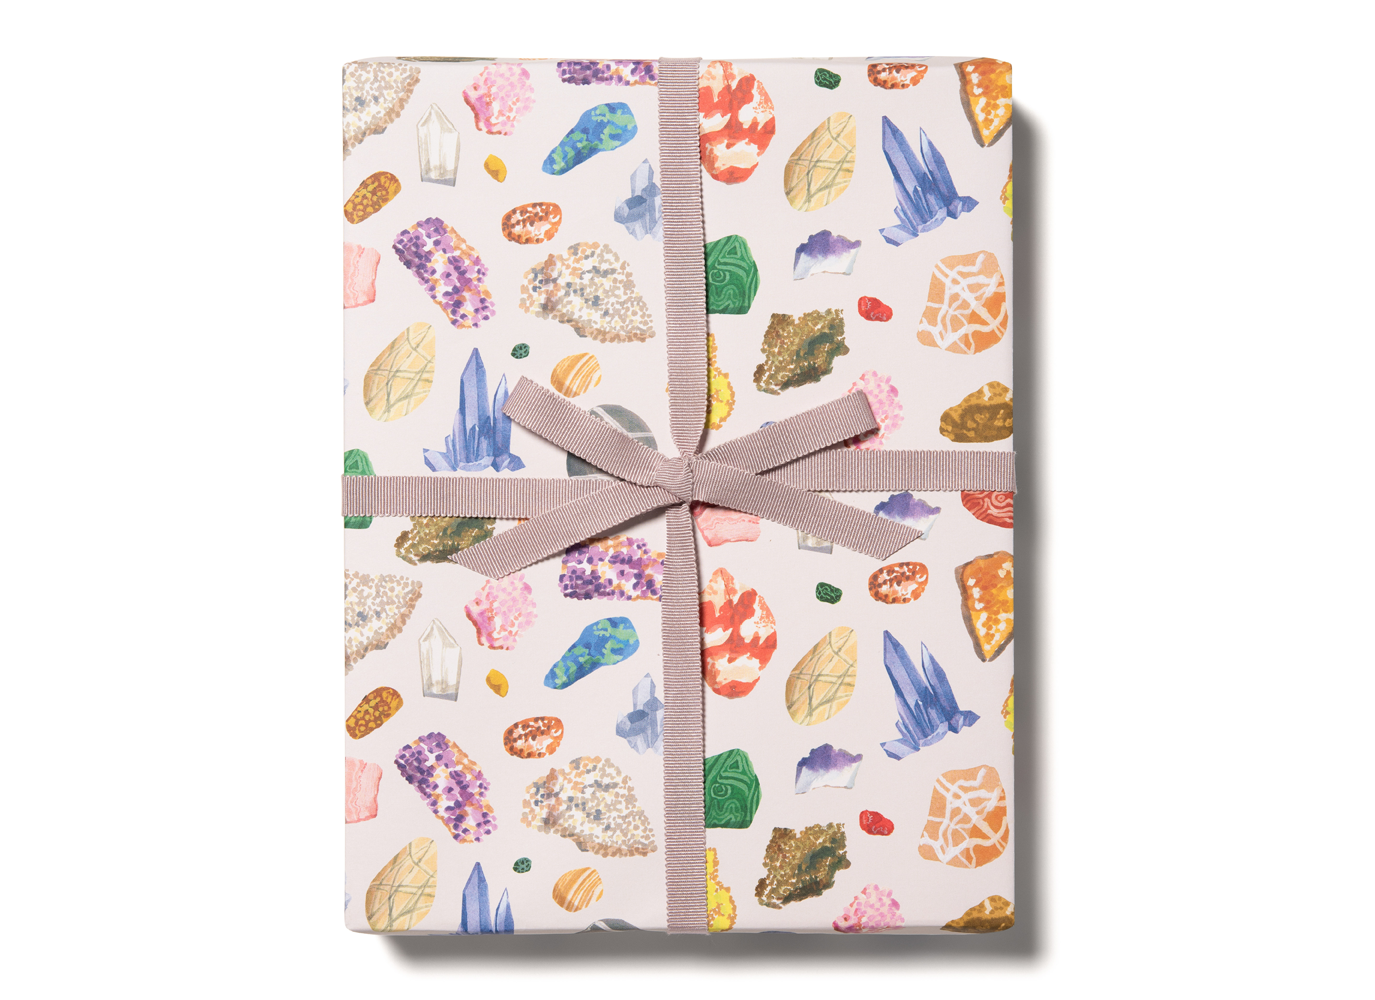 Gems wrapping paper rolls